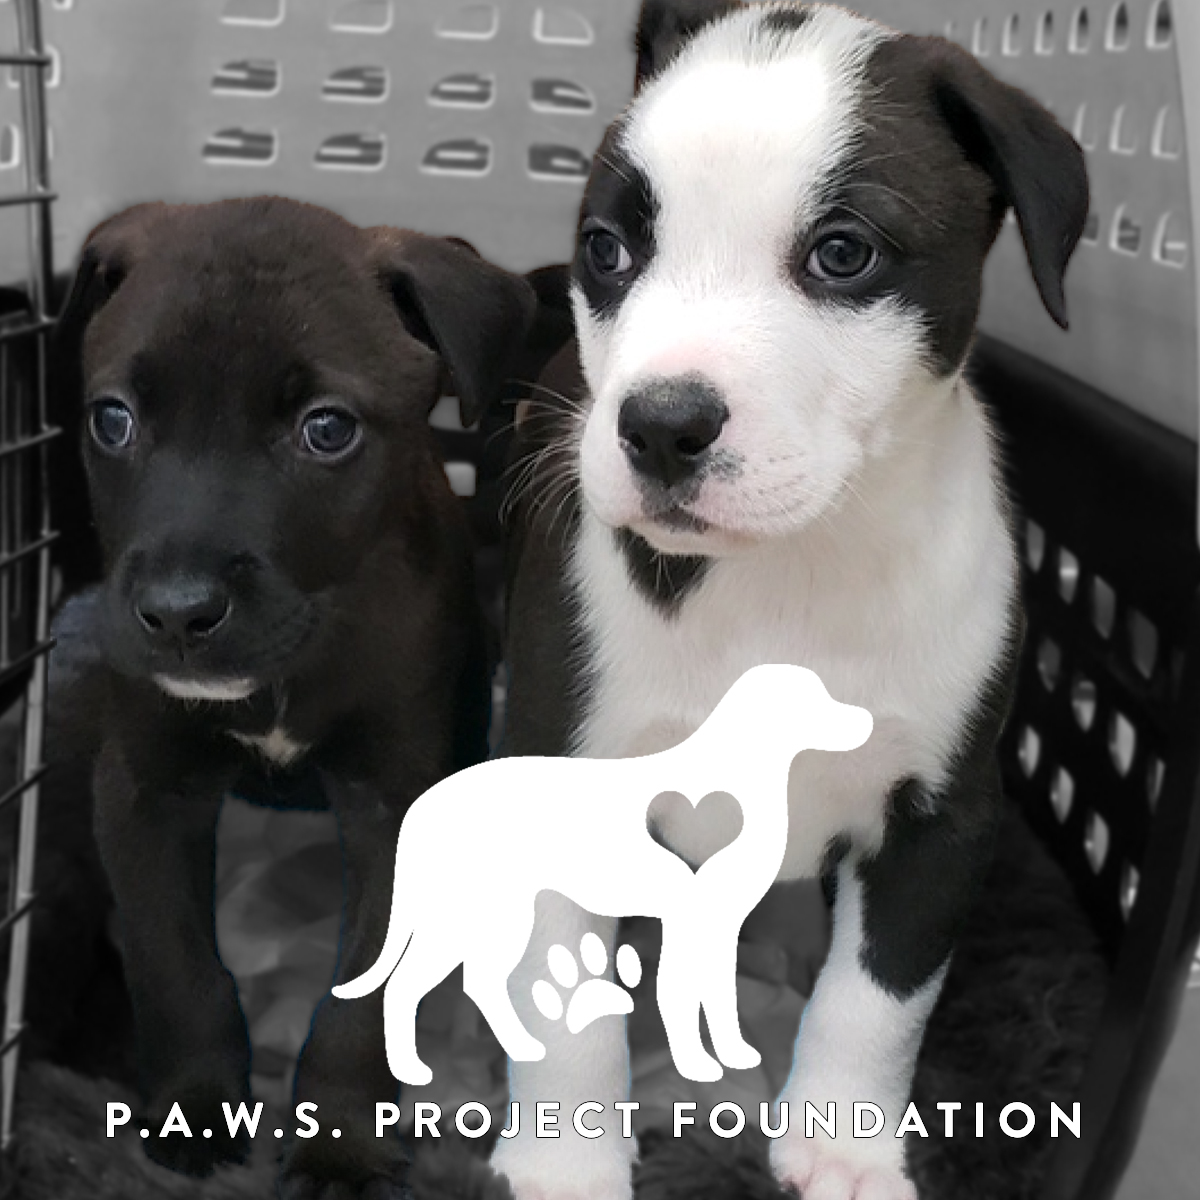 Photo of puppies in a shelter as part of the PAWS Project with their logo.